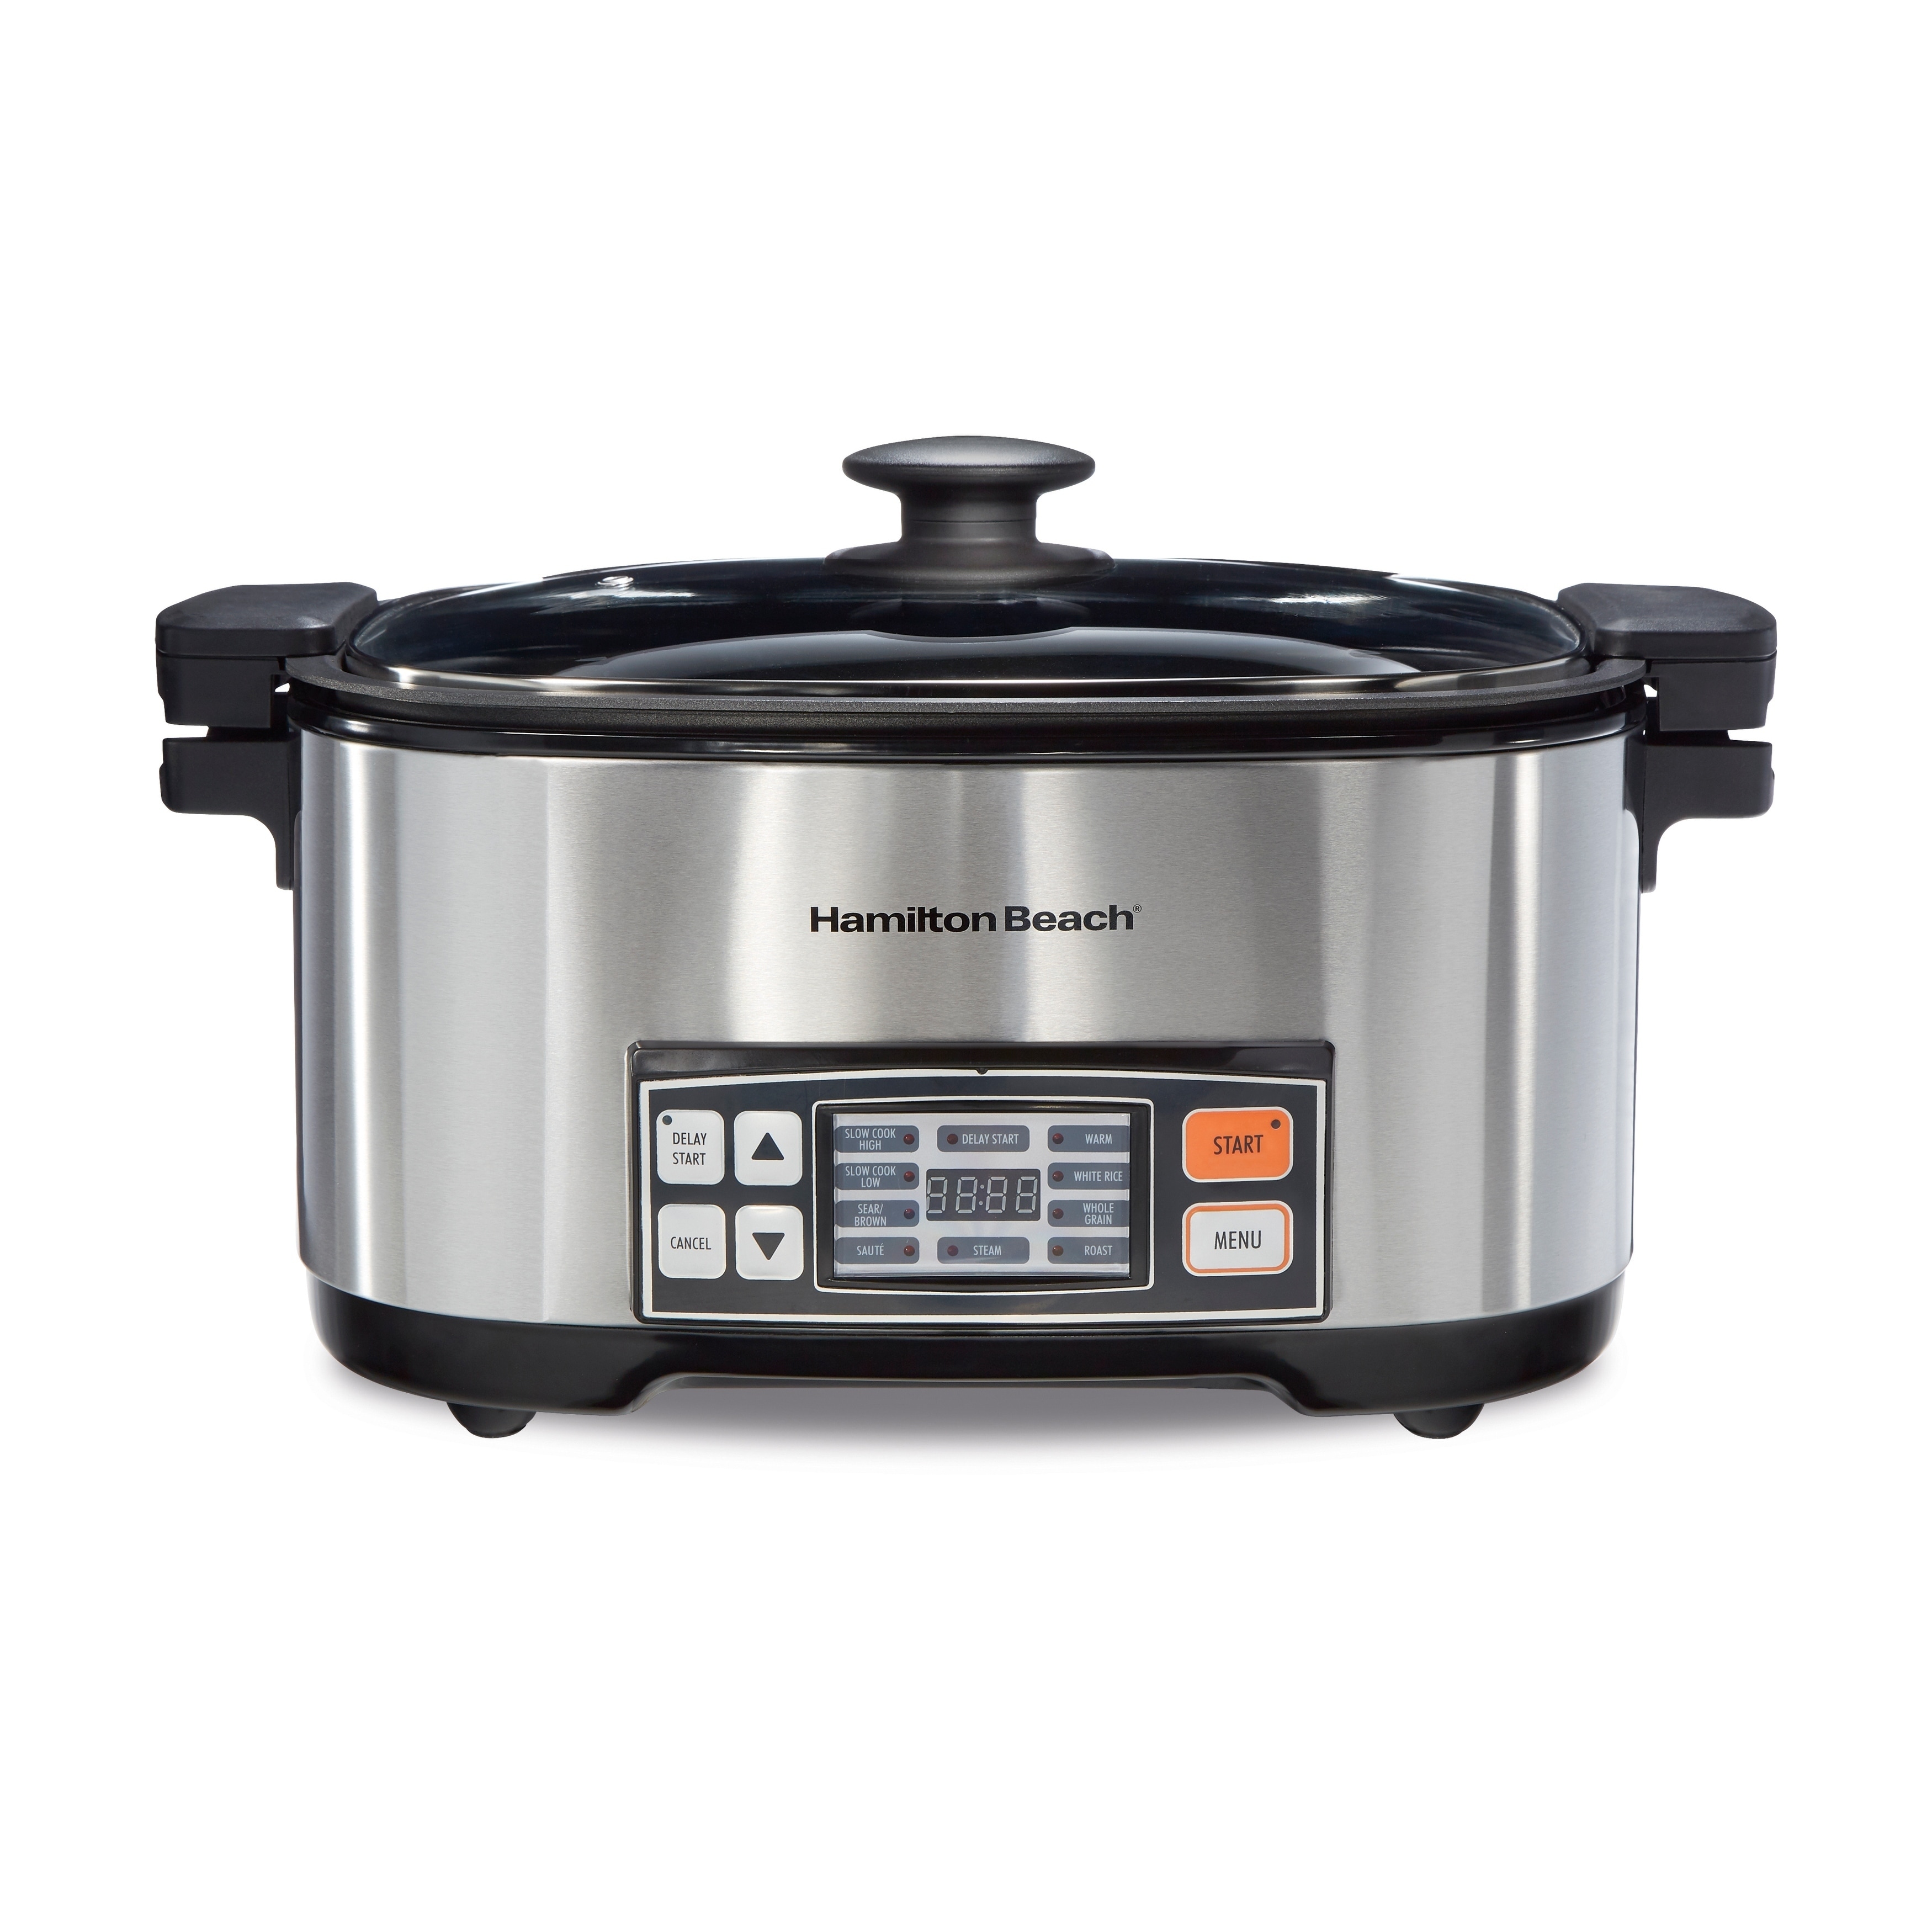 Black + Decker 6.5 Multicooker 3-In-1 Conventional Oven Stovetop